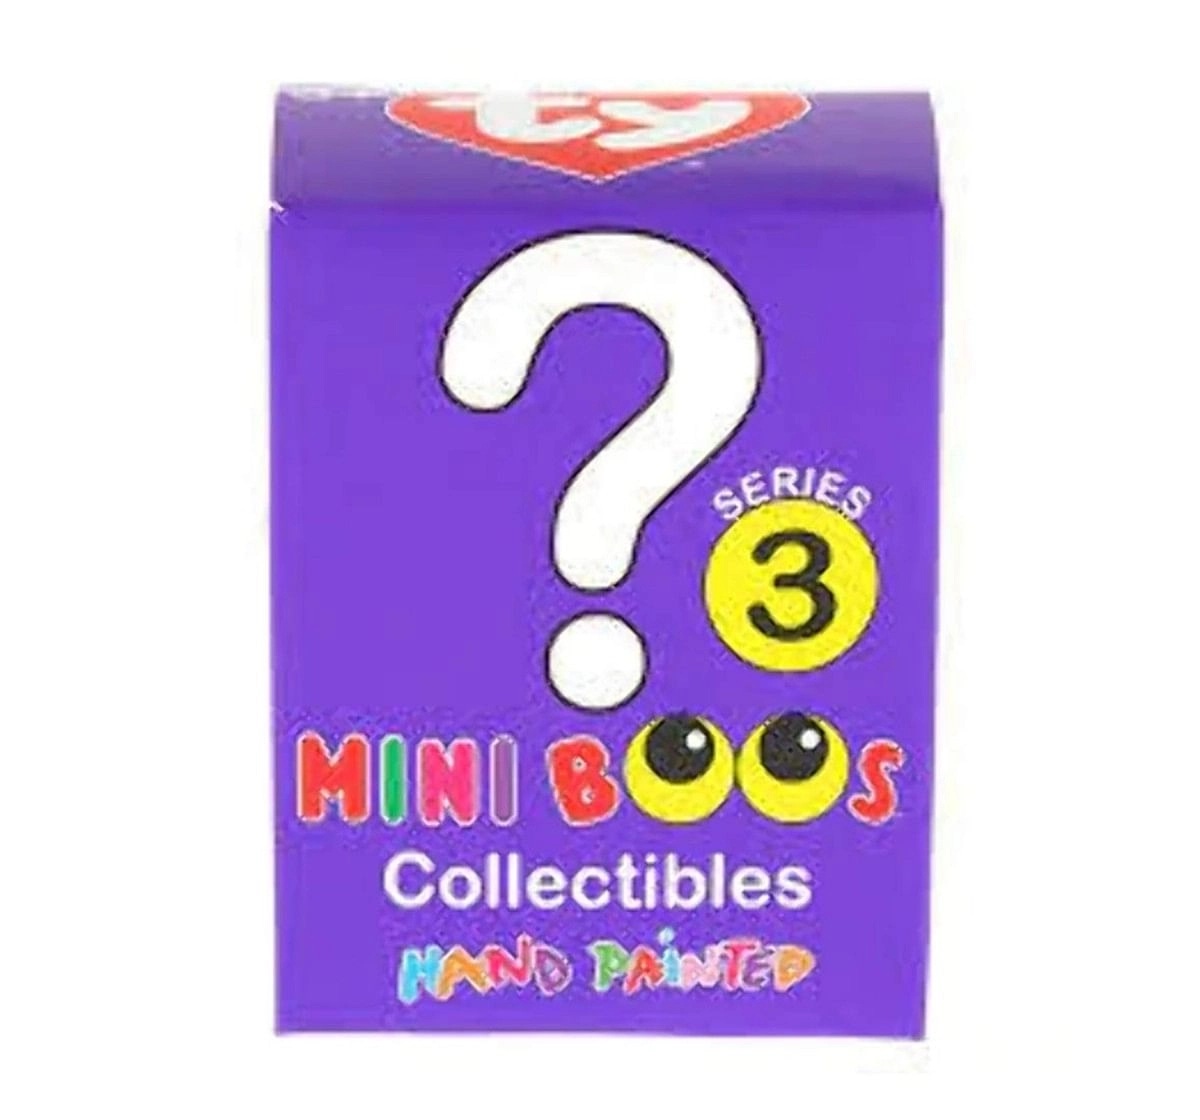 Ty MINI BOOS - Collectibles Series 3 Collectibles for Kids age 3Y+ - 7 Cm 